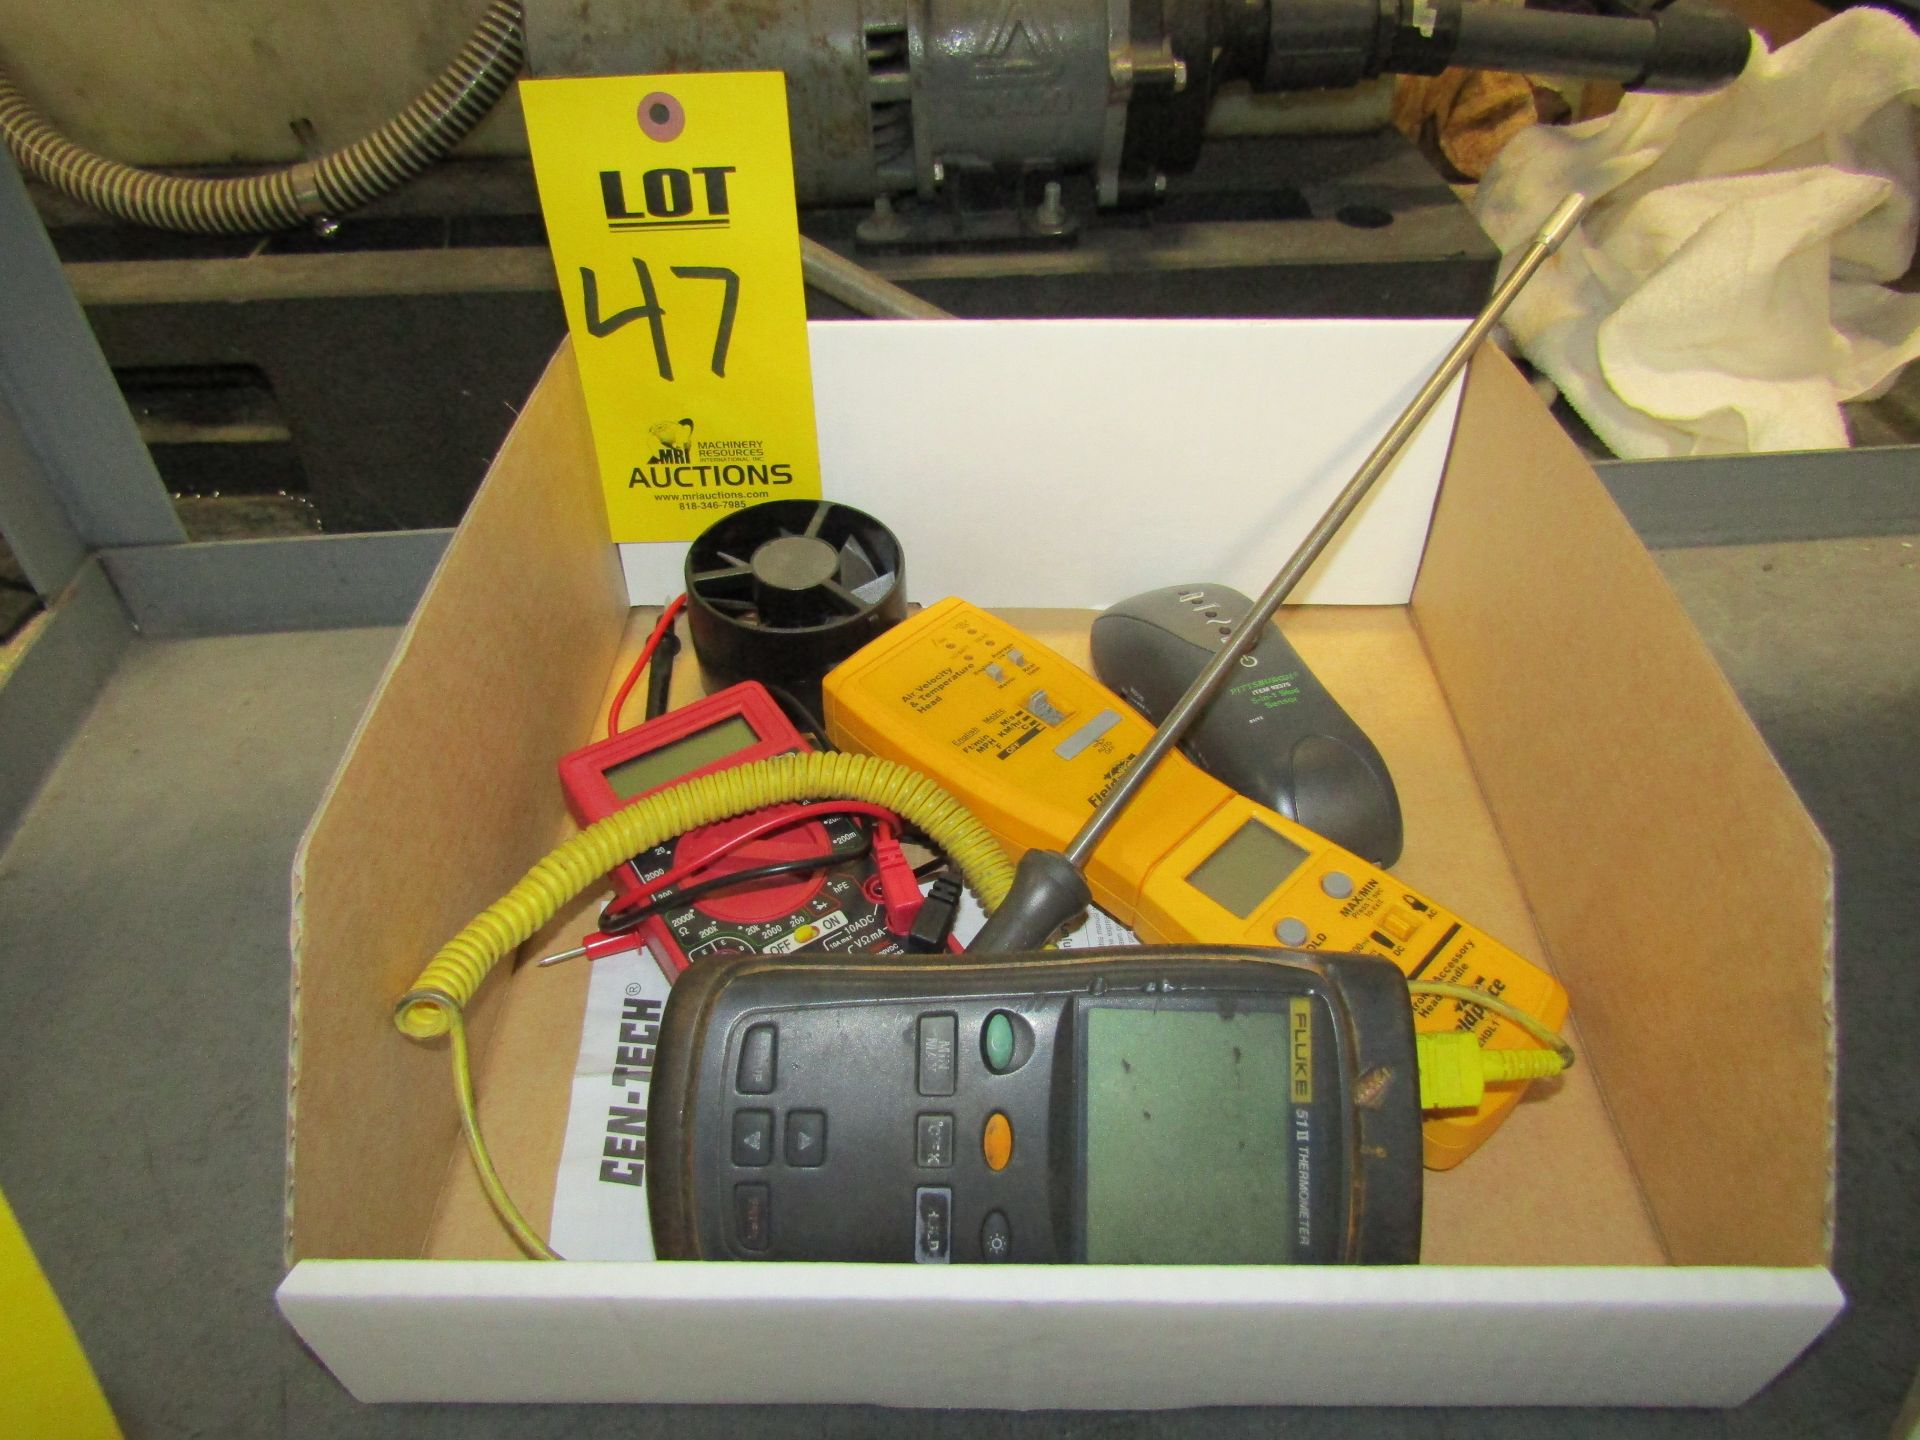 Lot to Include: Cen-Tech Digital Multimeter, (1) Fieldpiece AAV3 Air Velocity and Temperature